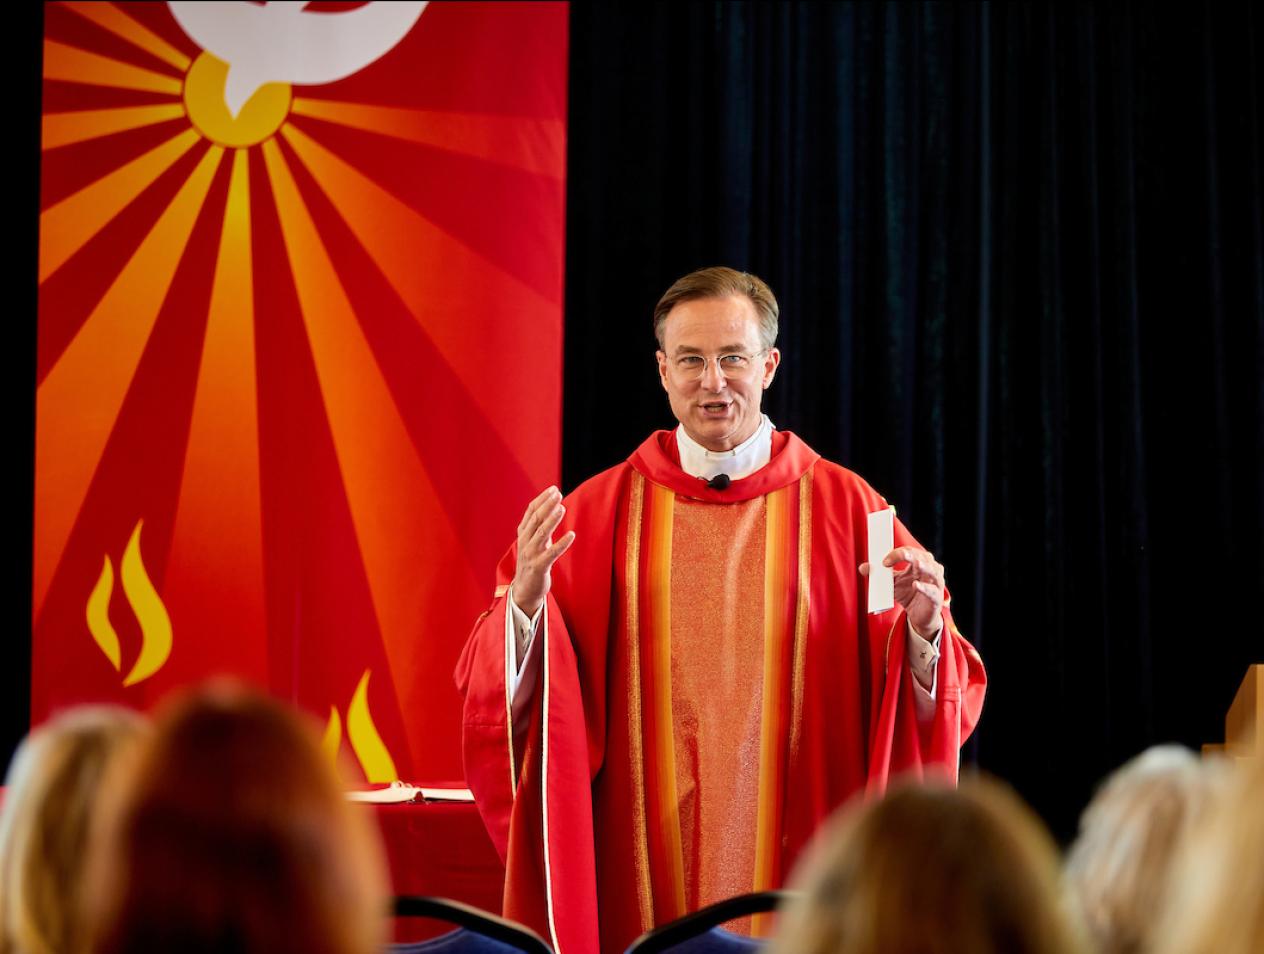 Daniel Hendrickson at Red Mass with audience